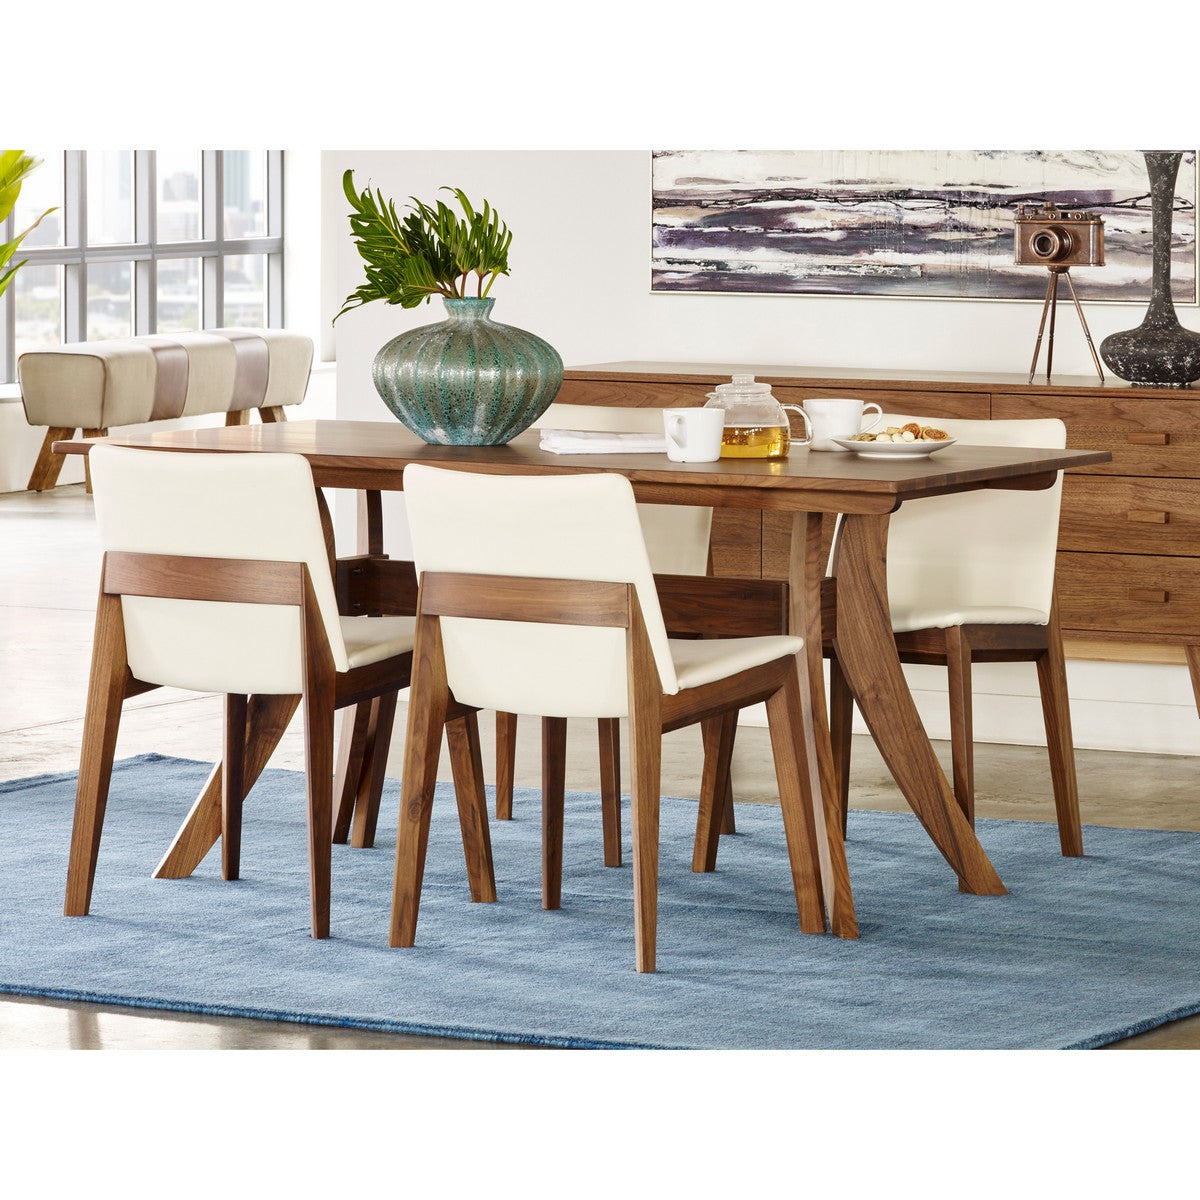 Moe's Home Collection Florence Rectangular Dining Table Small Walnut - BC-1001-03 - Moe's Home Collection - Dining Tables - Minimal And Modern - 1